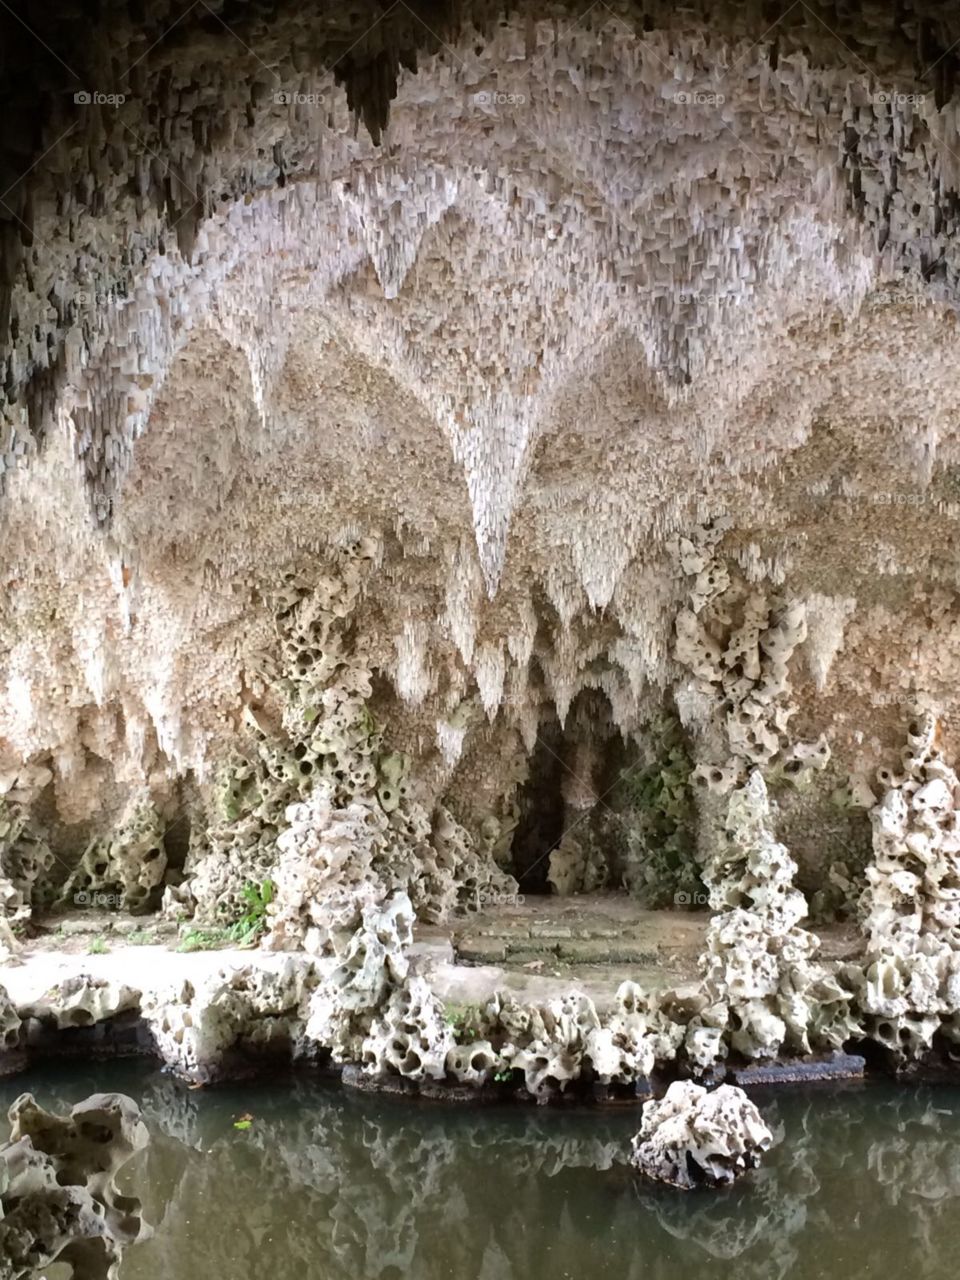 Stalactites in the man made grottos of the 18th Century, England